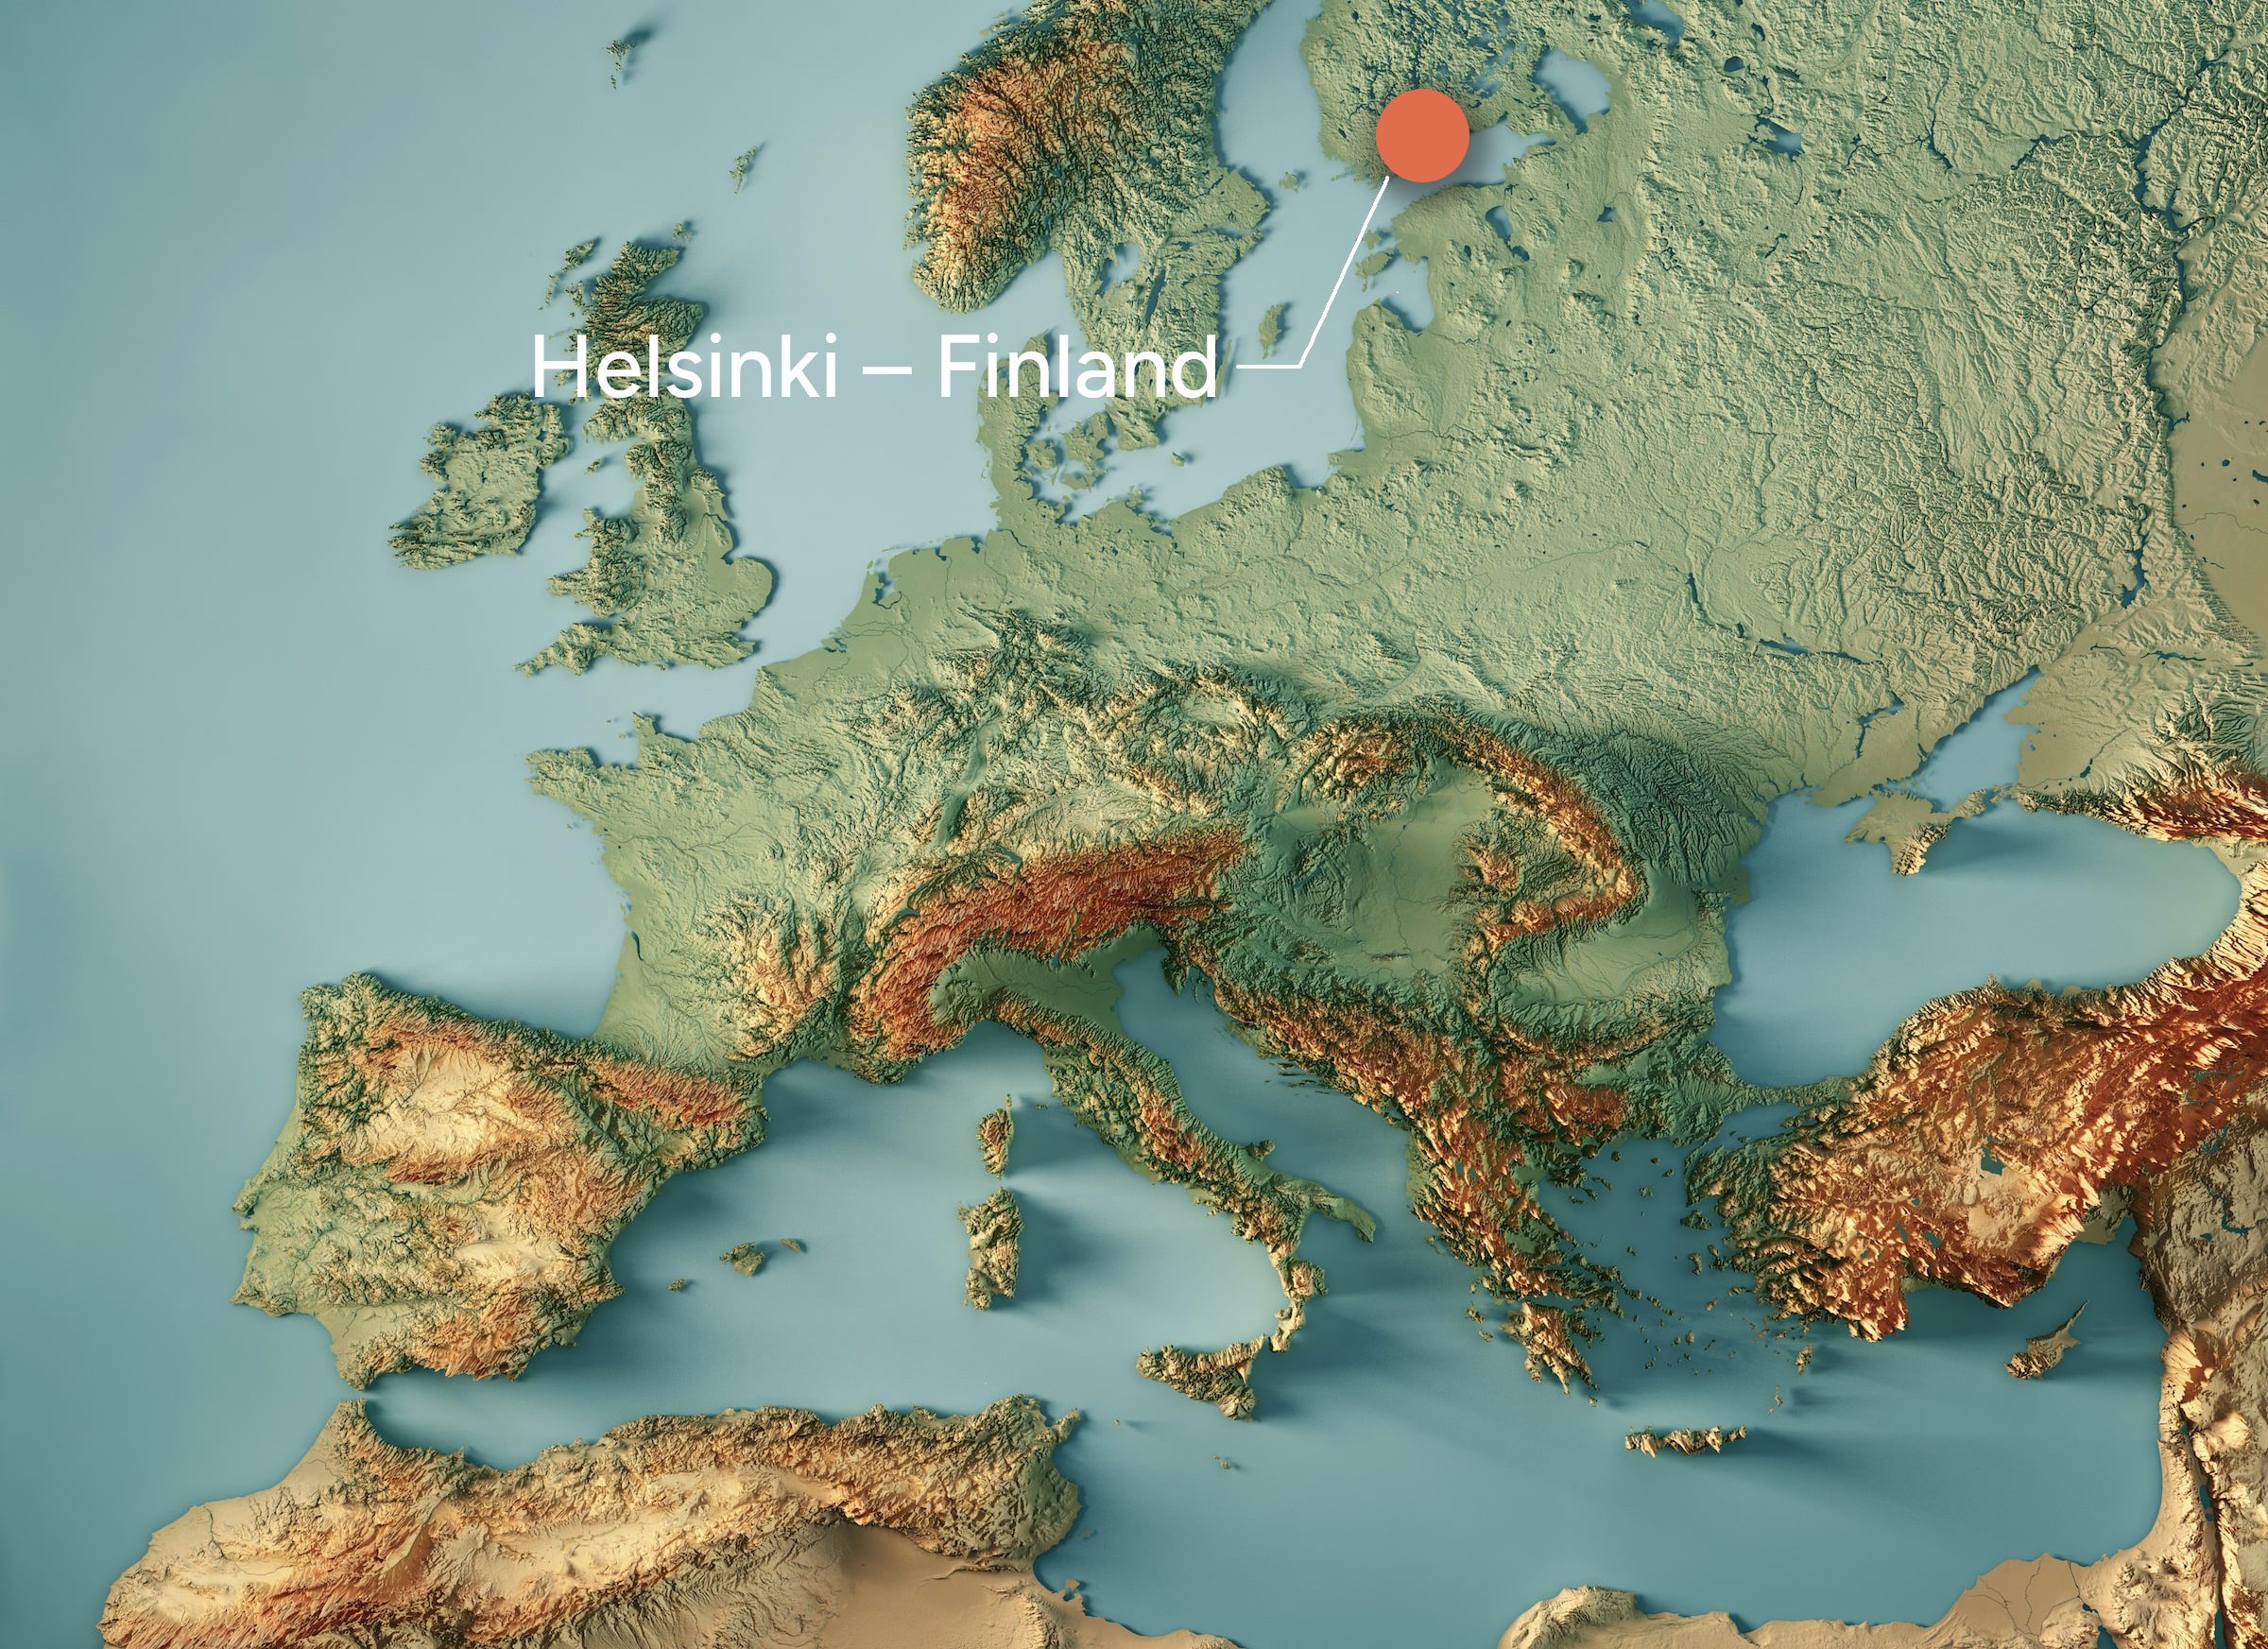 Topography map of Europe highlighting Helsinki, Finland